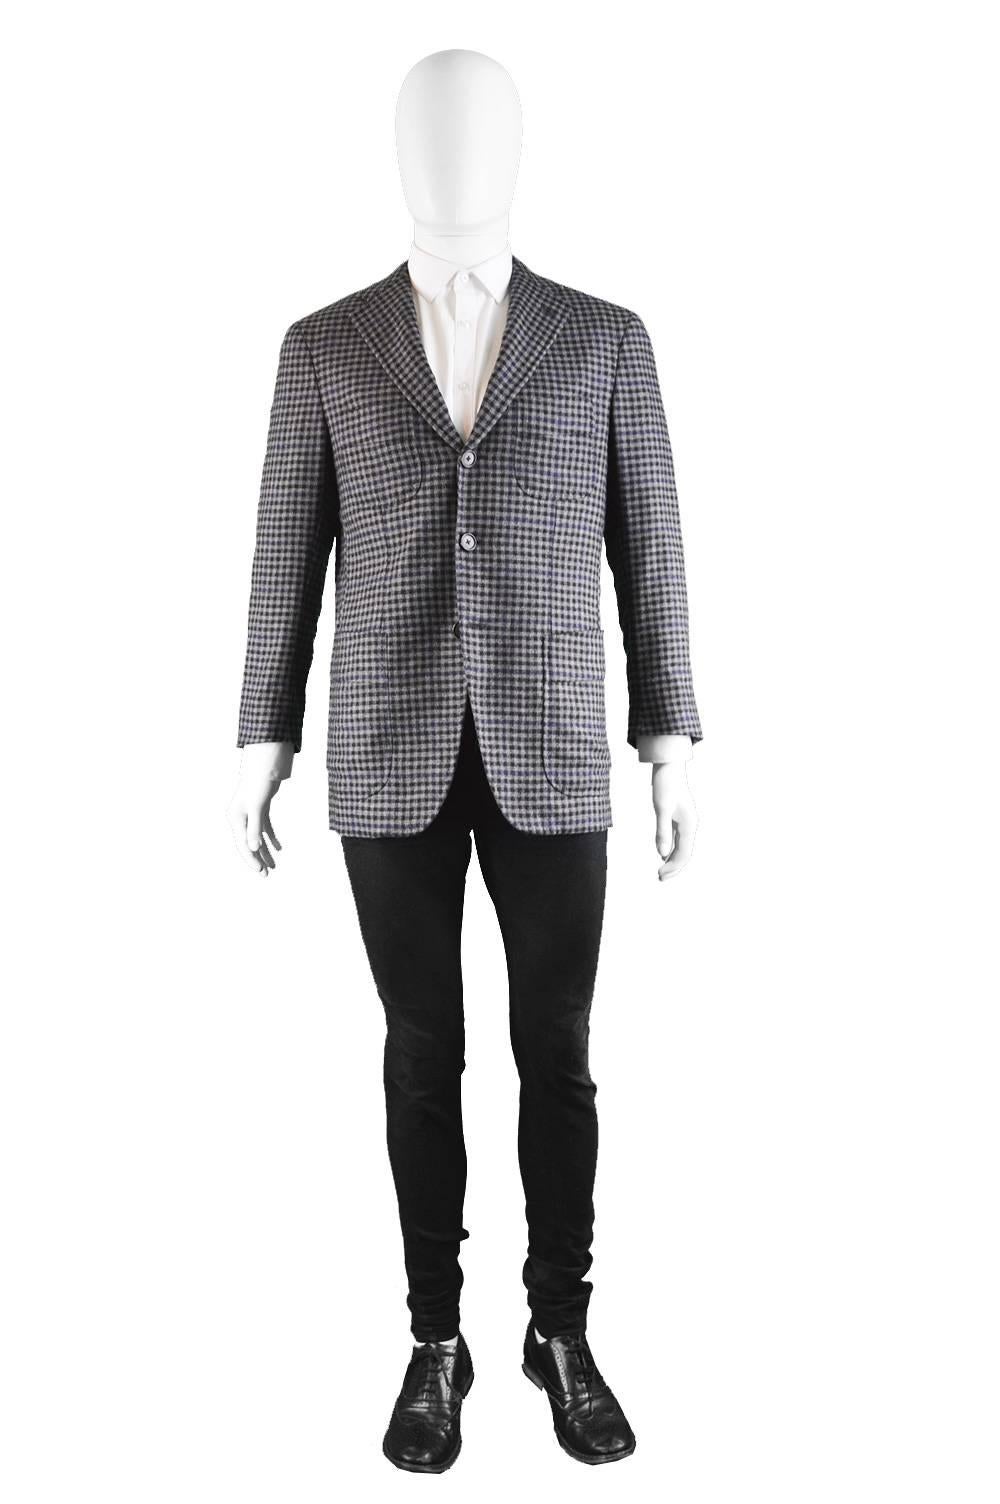 A luxurious mens sport coat / blazer from c. the 1990s by Gianfranco Ferre for his high-end 'homme couture' line. In a grey alpaca, angora, cashmere and wool fabric with a check pattern throughout. With four patch pockets to the front and a large